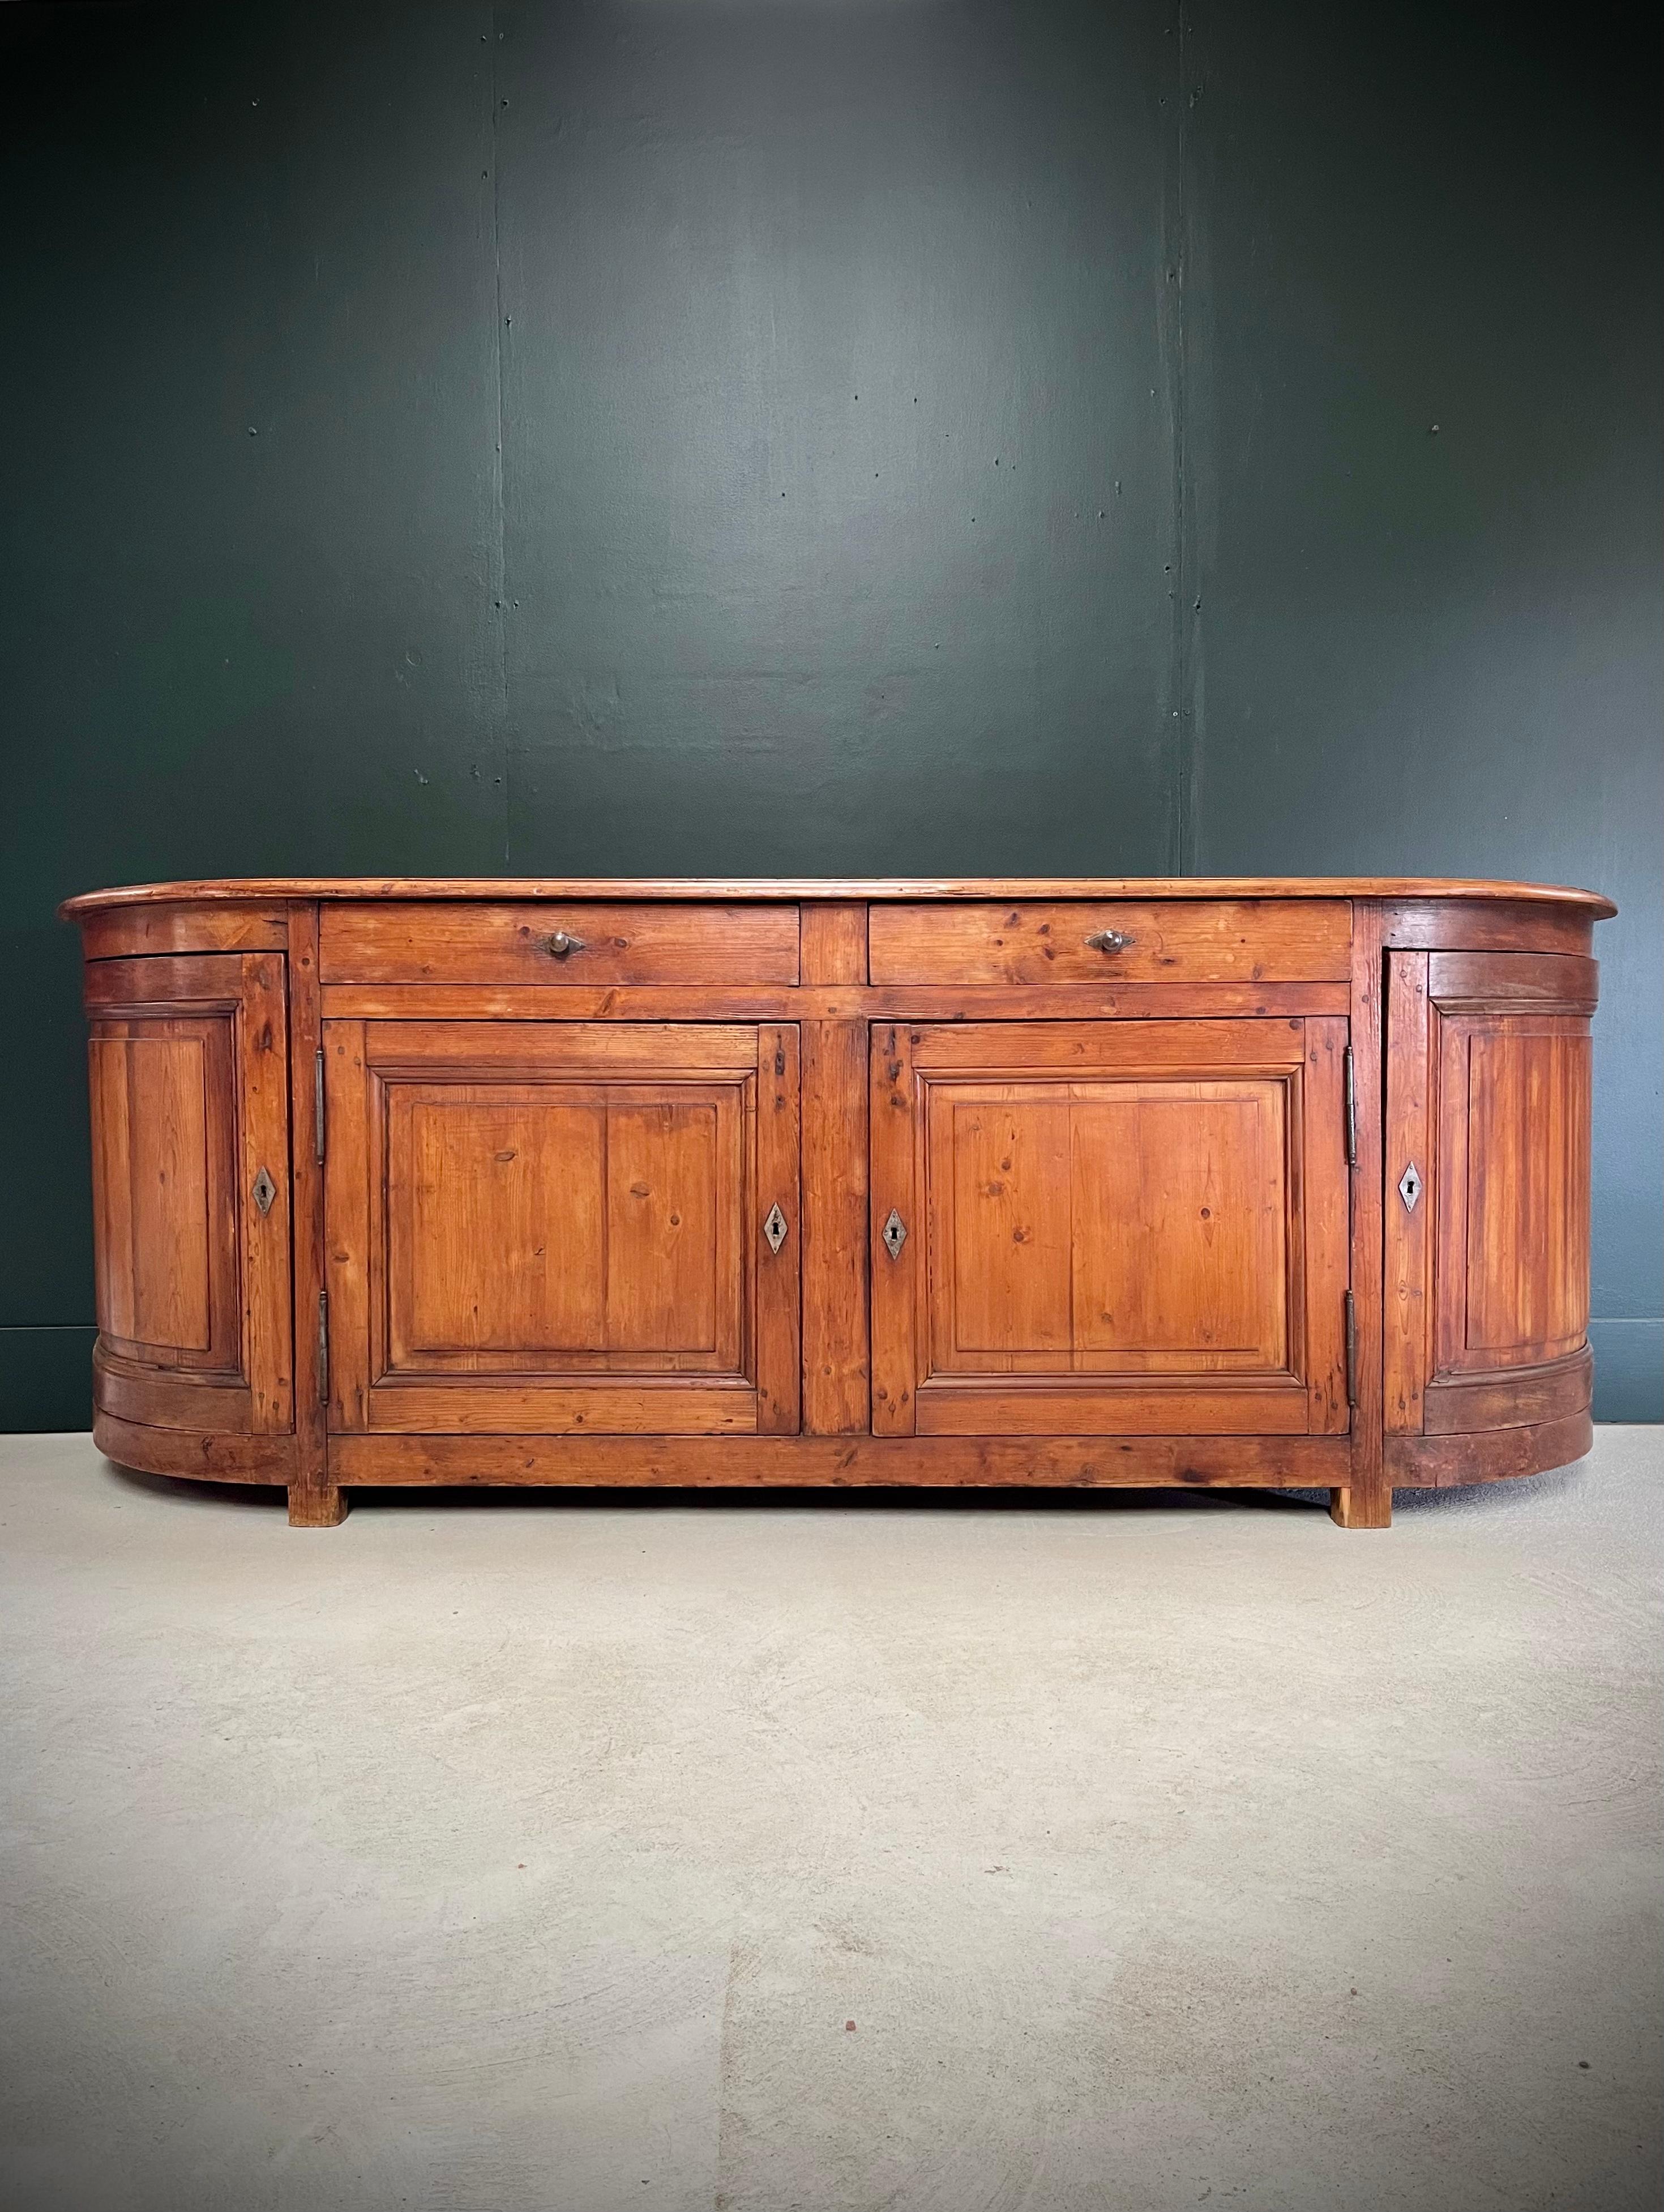 Mid 19th C French Savoyard 4 door Curved Sideboard / Buffet, Console, Credenza In Good Condition For Sale In Mckinney, TX